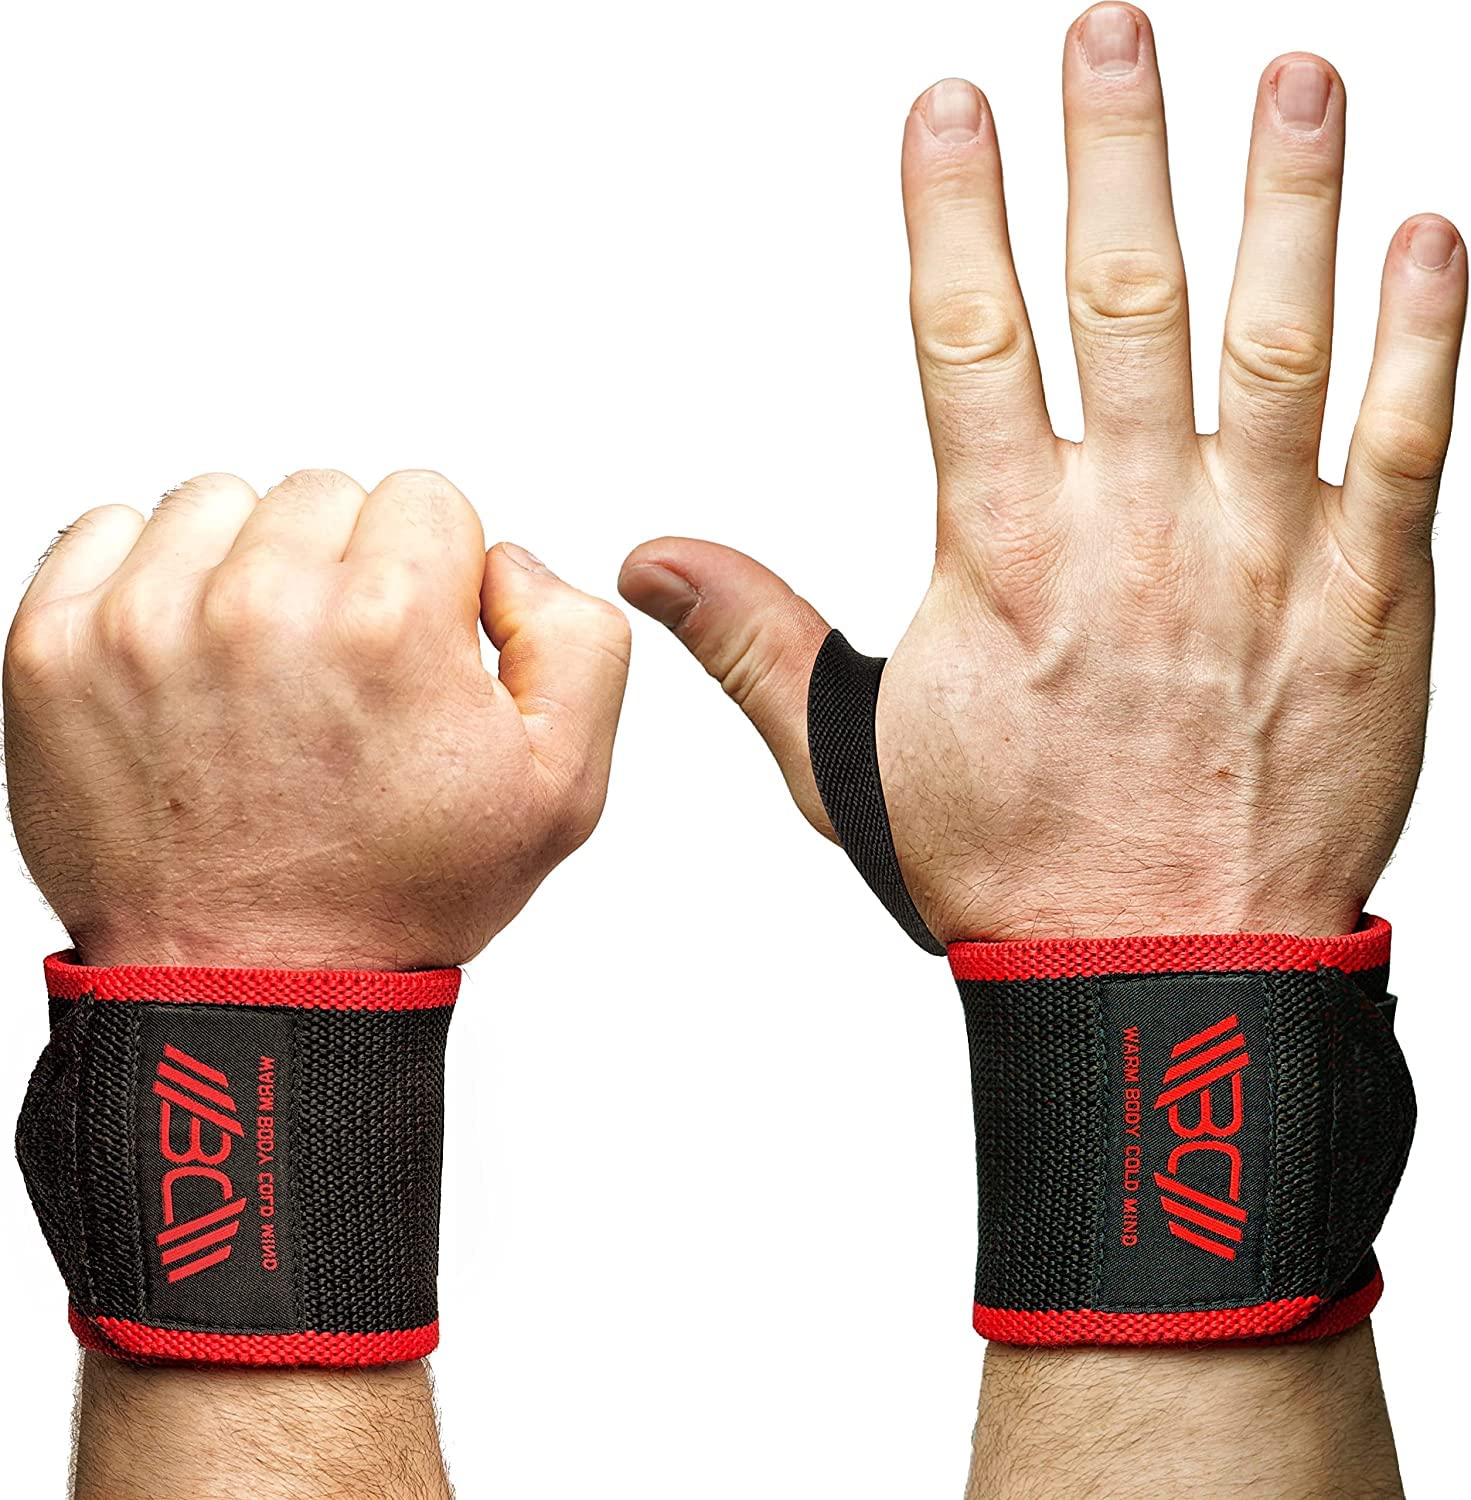 Flexible Weight Lifting Wrist Wraps - Dangerously Fit